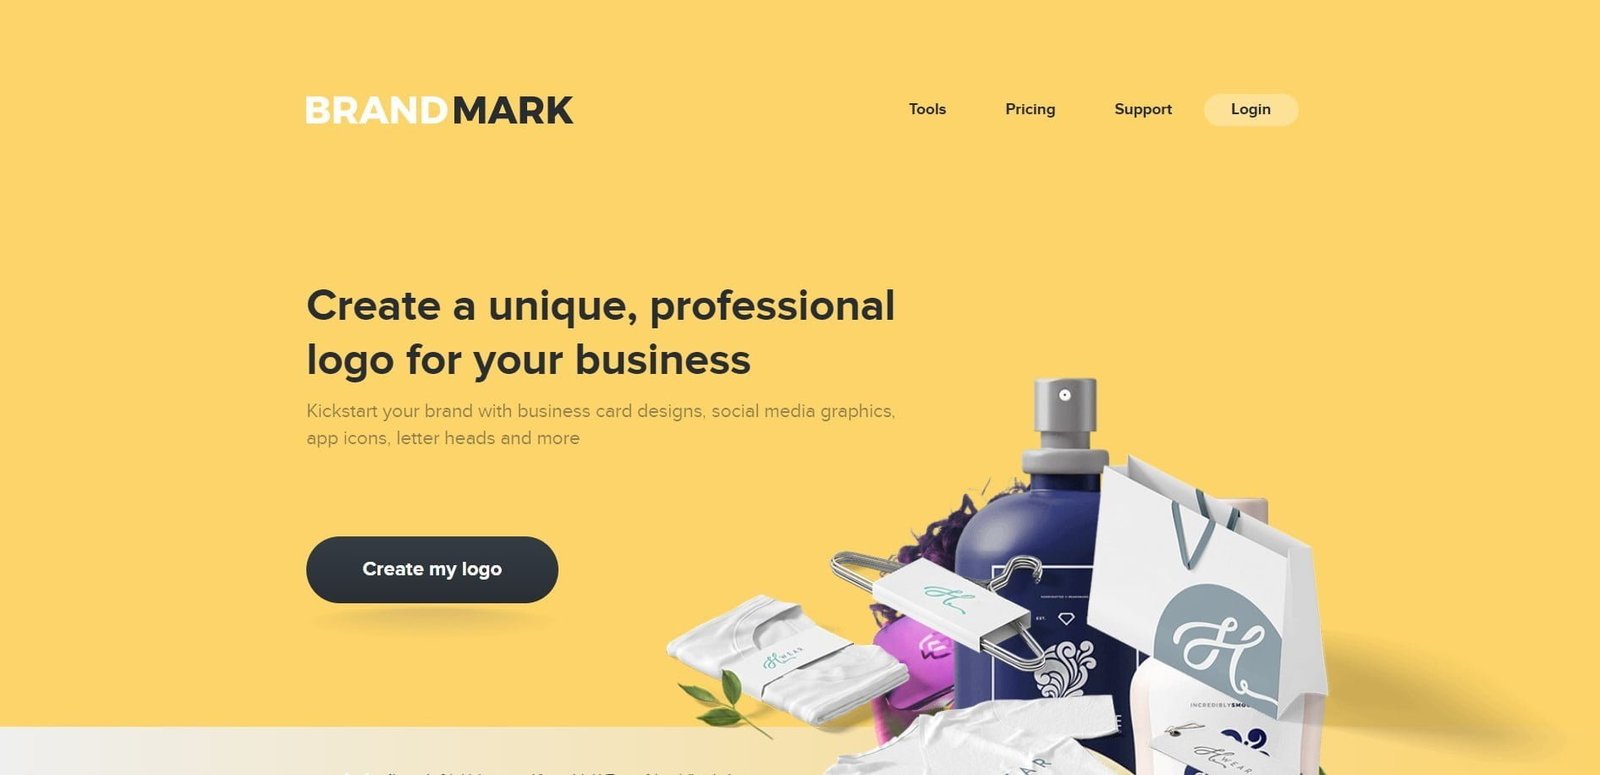 Brandmark is a logo AI design tool that enables users to create logos and branding assets such as business card designs